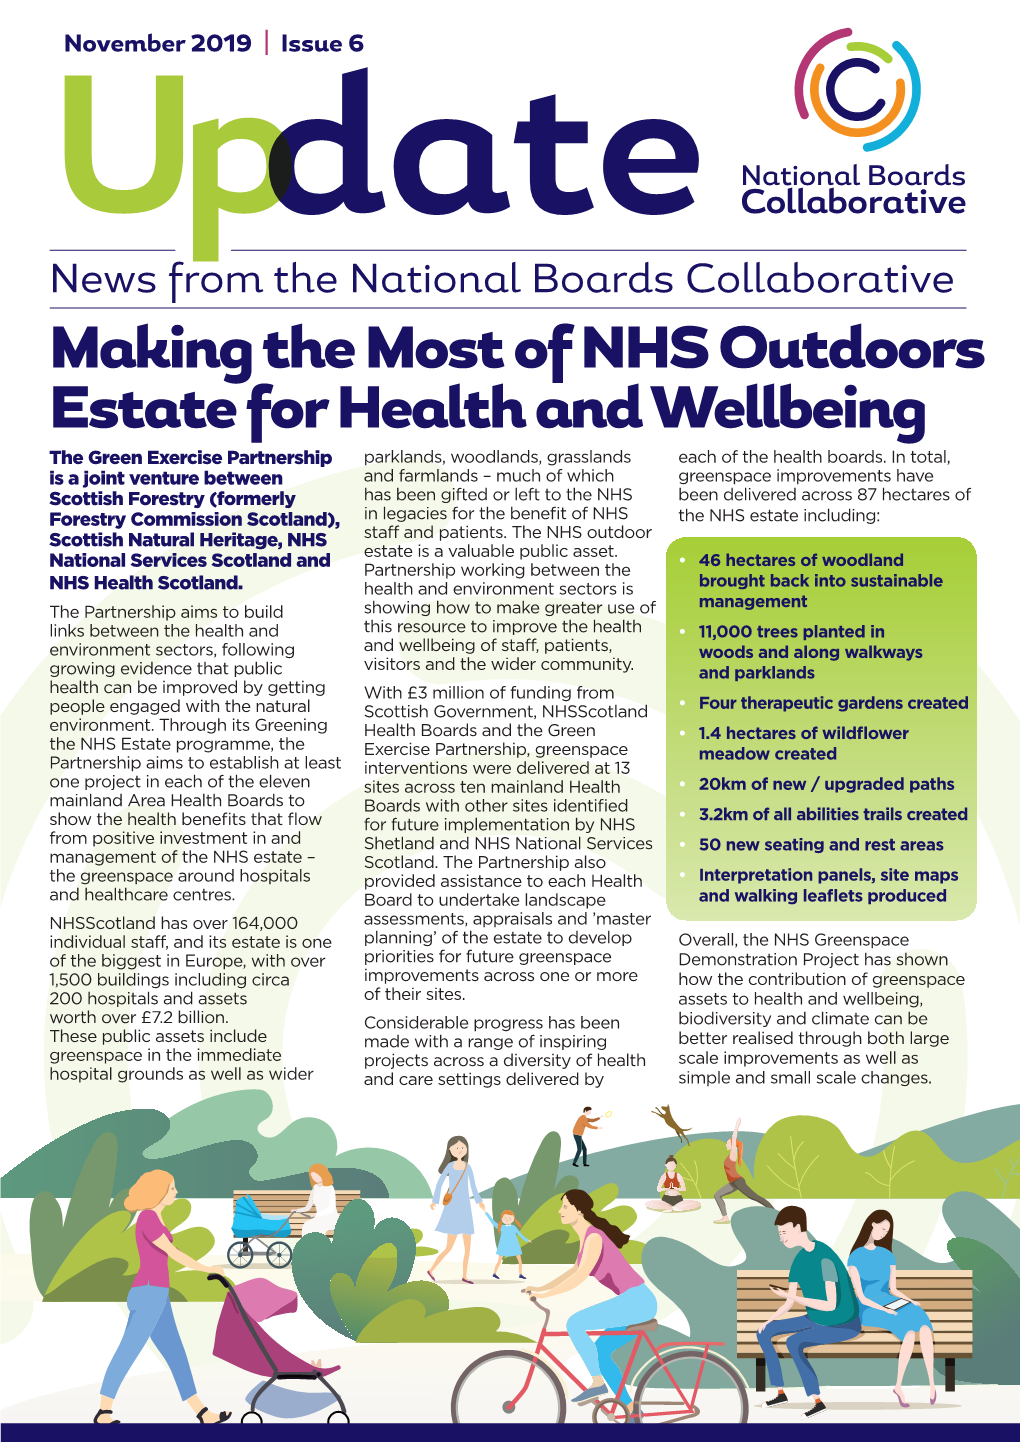 Making the Most of NHS Outdoors Estate for Health and Wellbeing the Green Exercise Partnership Parklands, Woodlands, Grasslands Each of the Health Boards